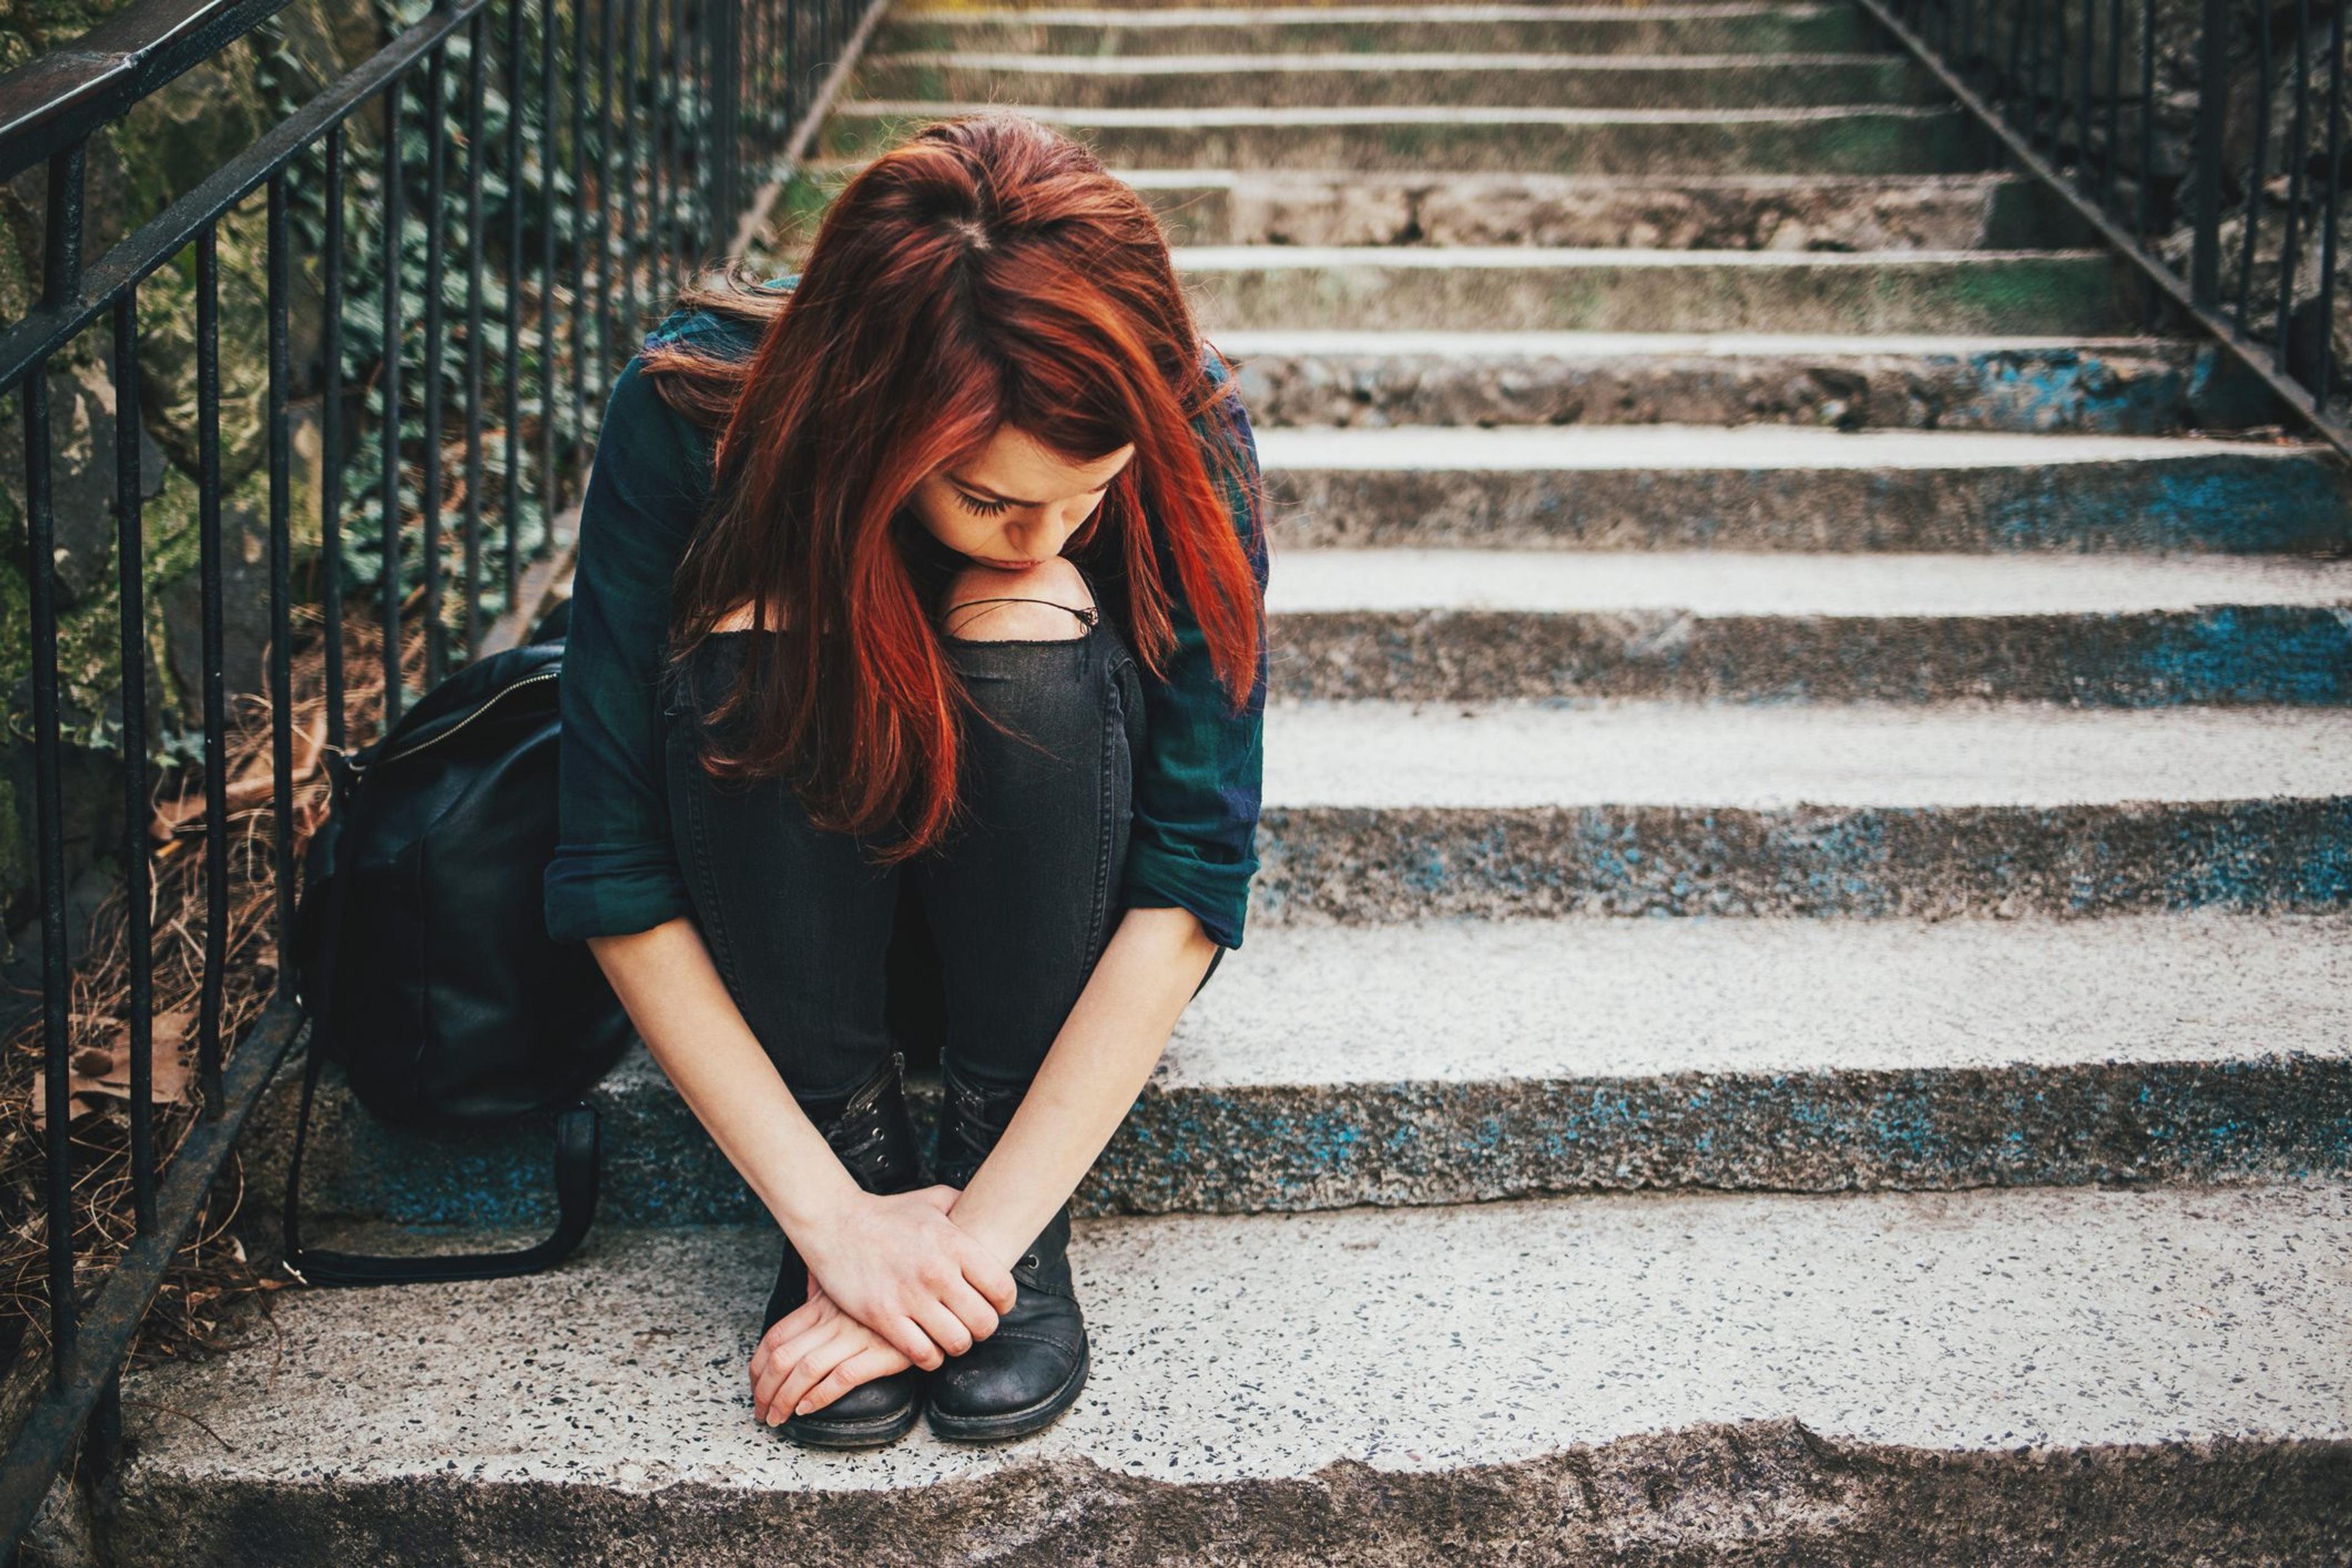 Sad female teenager sitting on the stairs struggling with mental health